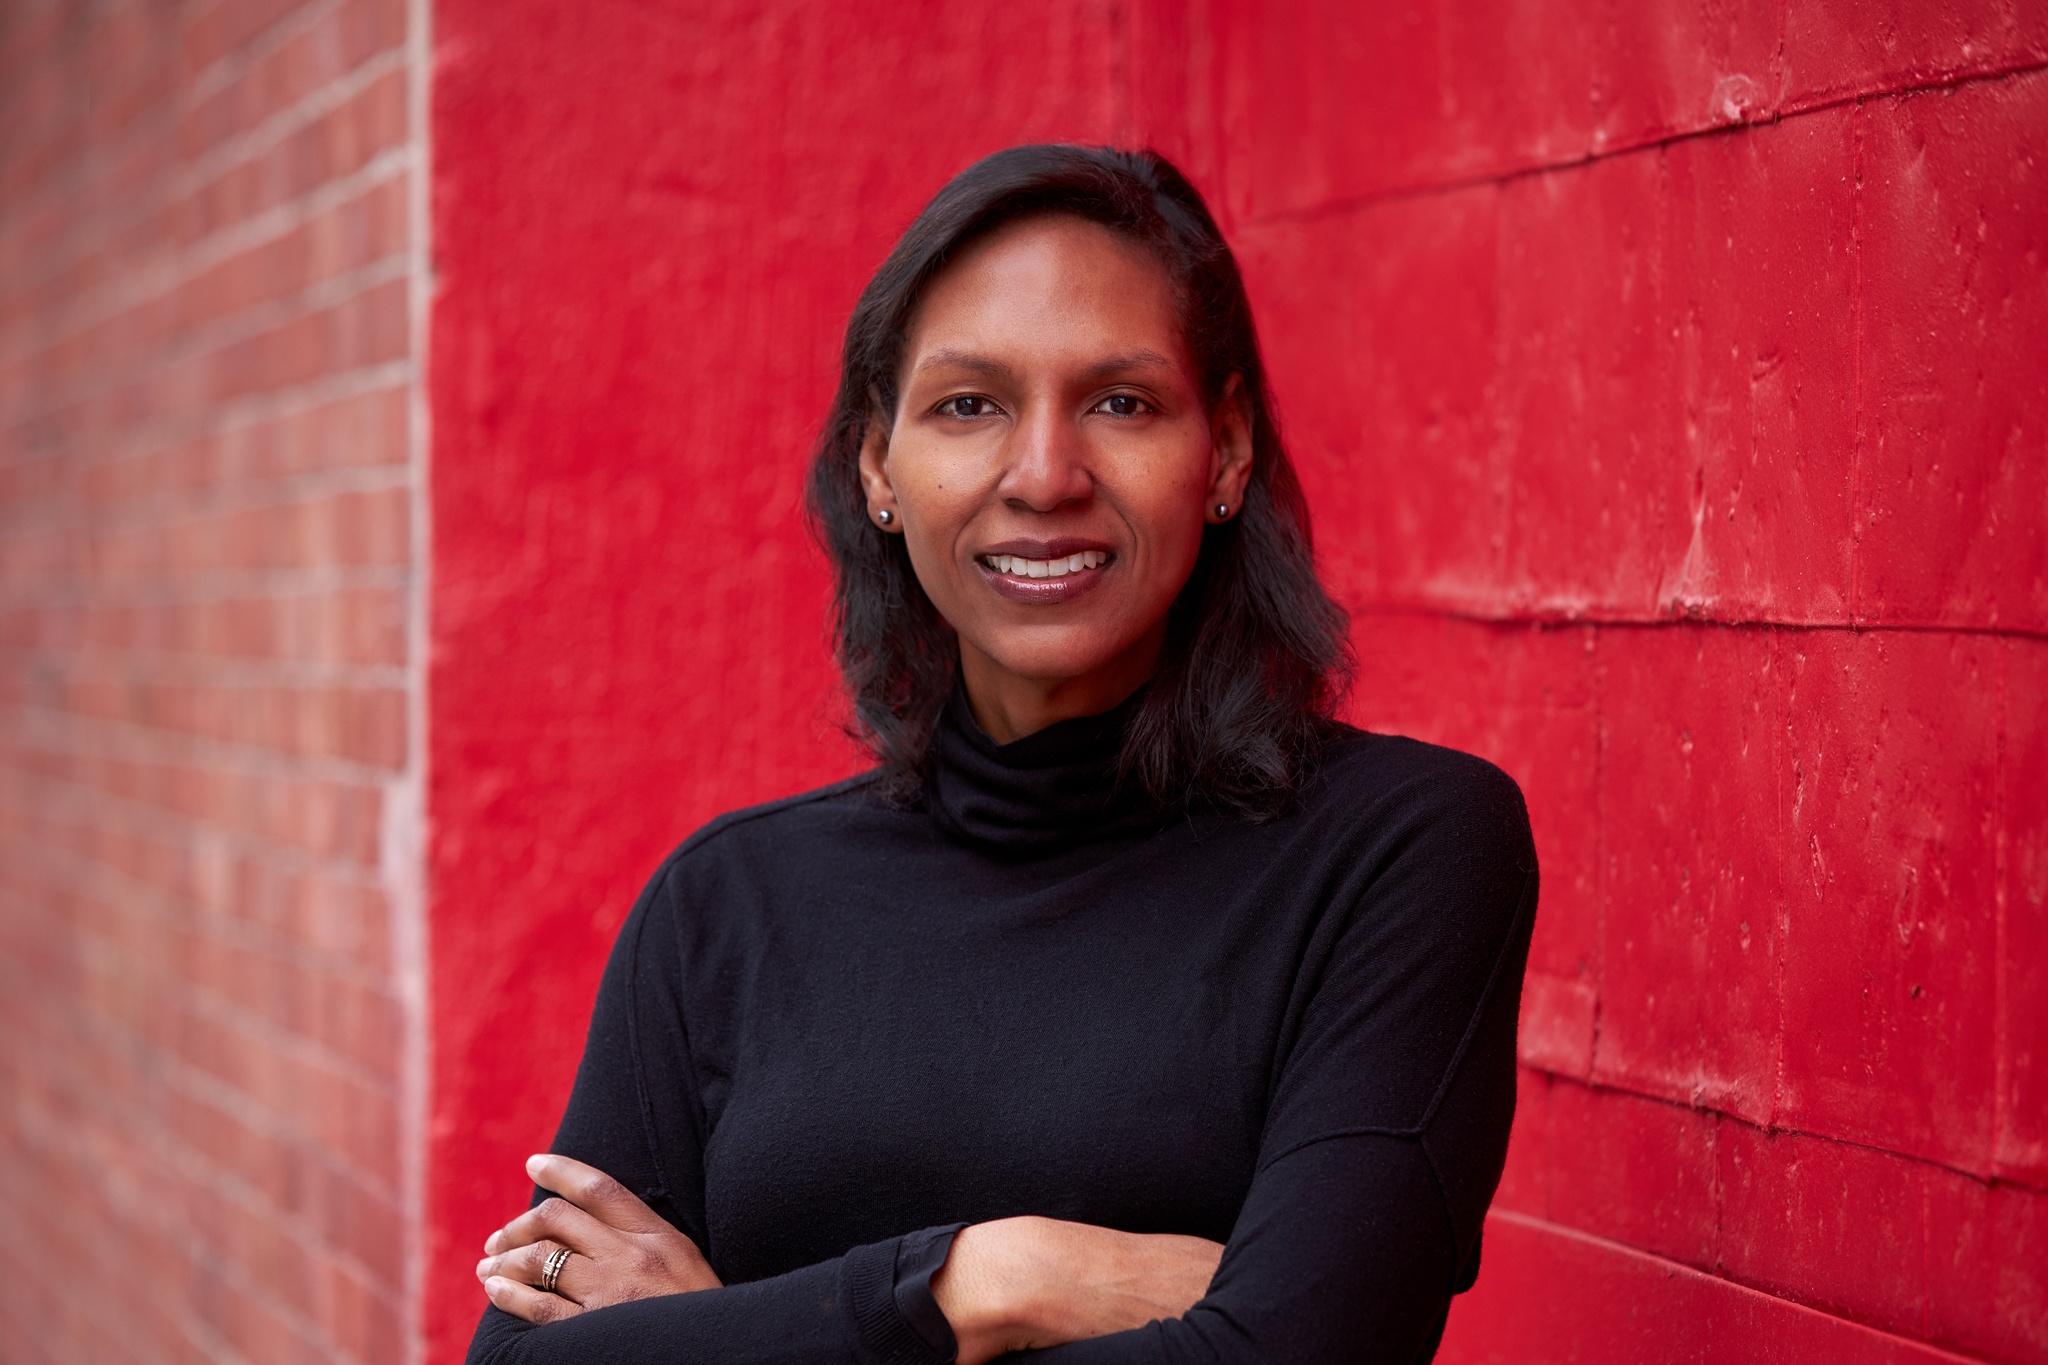 A photo of curator, art historian, and professor Courtney J. Martin wearing a black long-sleeve turtle neck and smiling with arms crossed against a wall painted a bright red. 